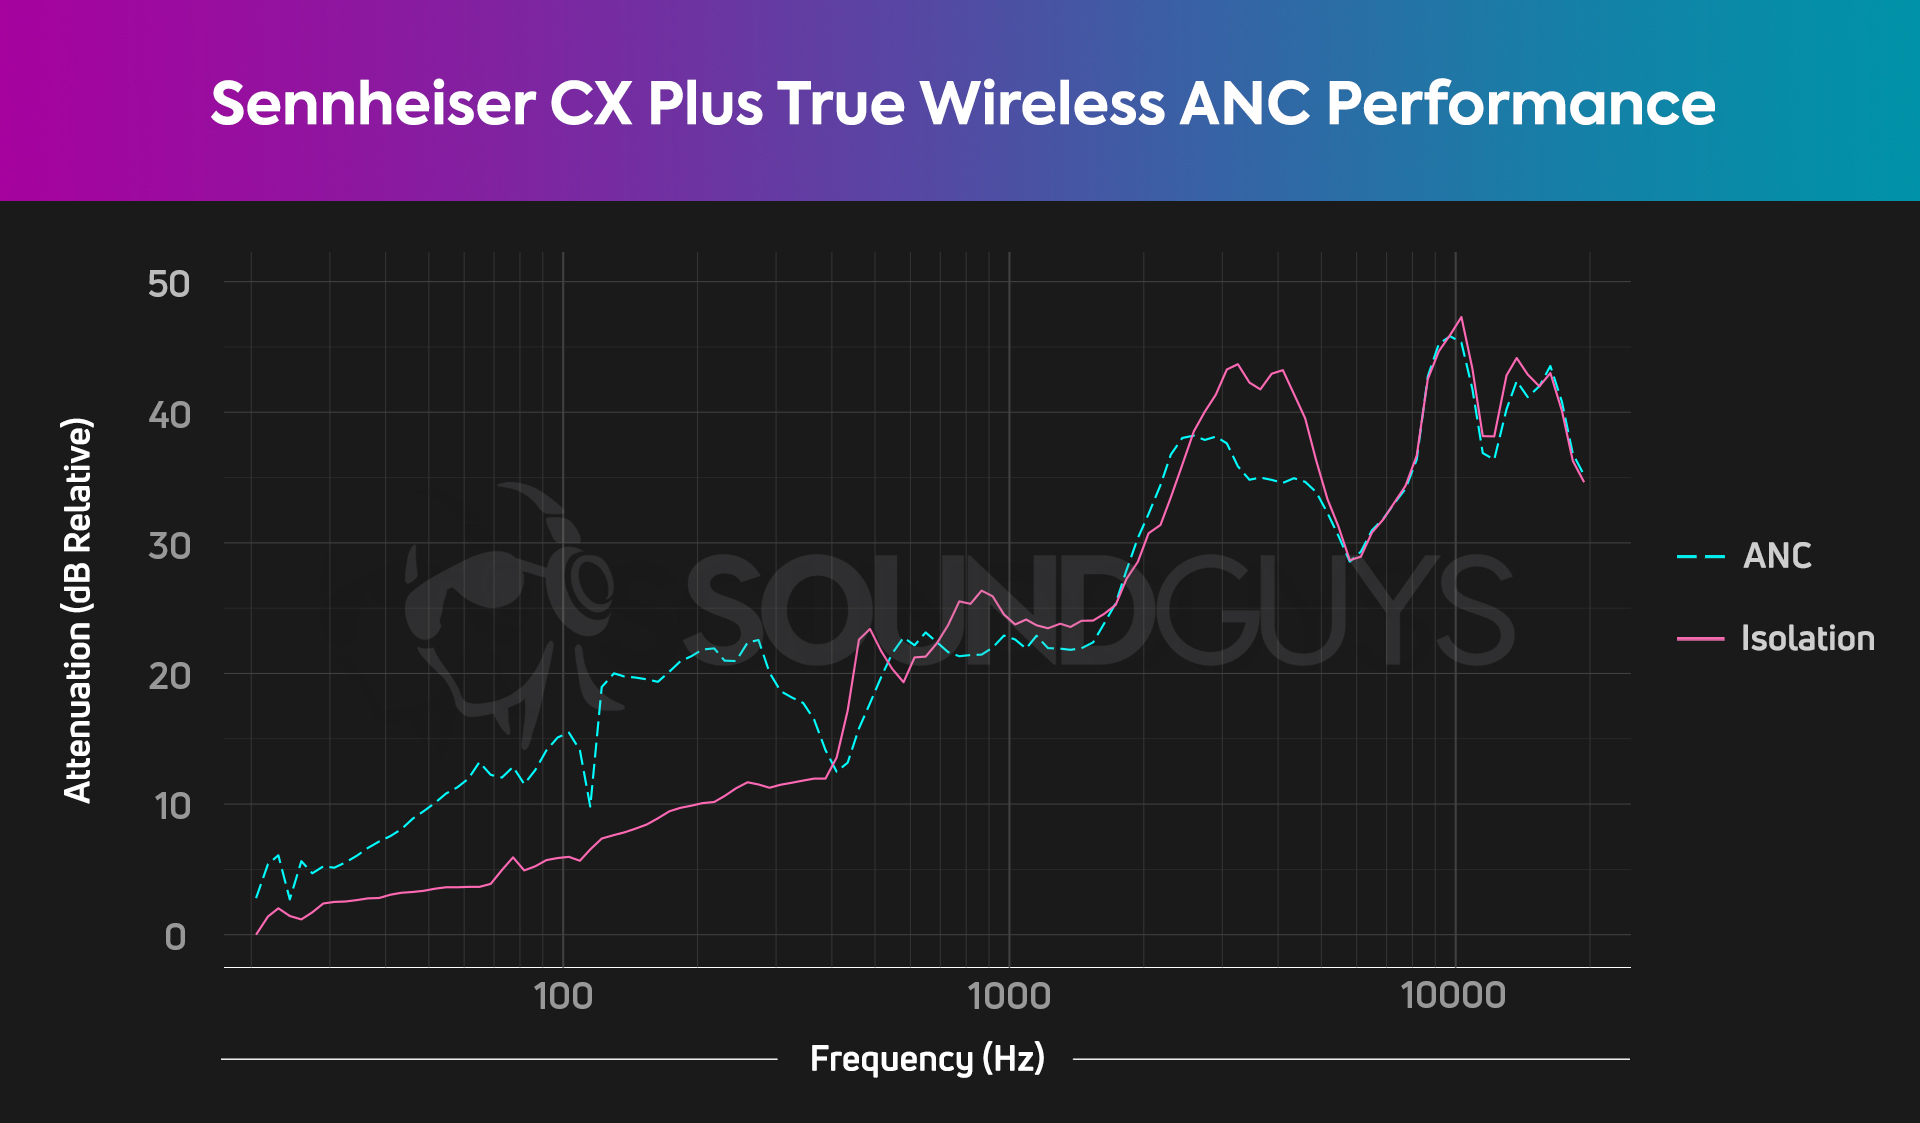 A noise canceling/isolation chart for the Sennheiser CX Plus True Wireless earbuds, which shows good isolation, a decent low end attentuation.